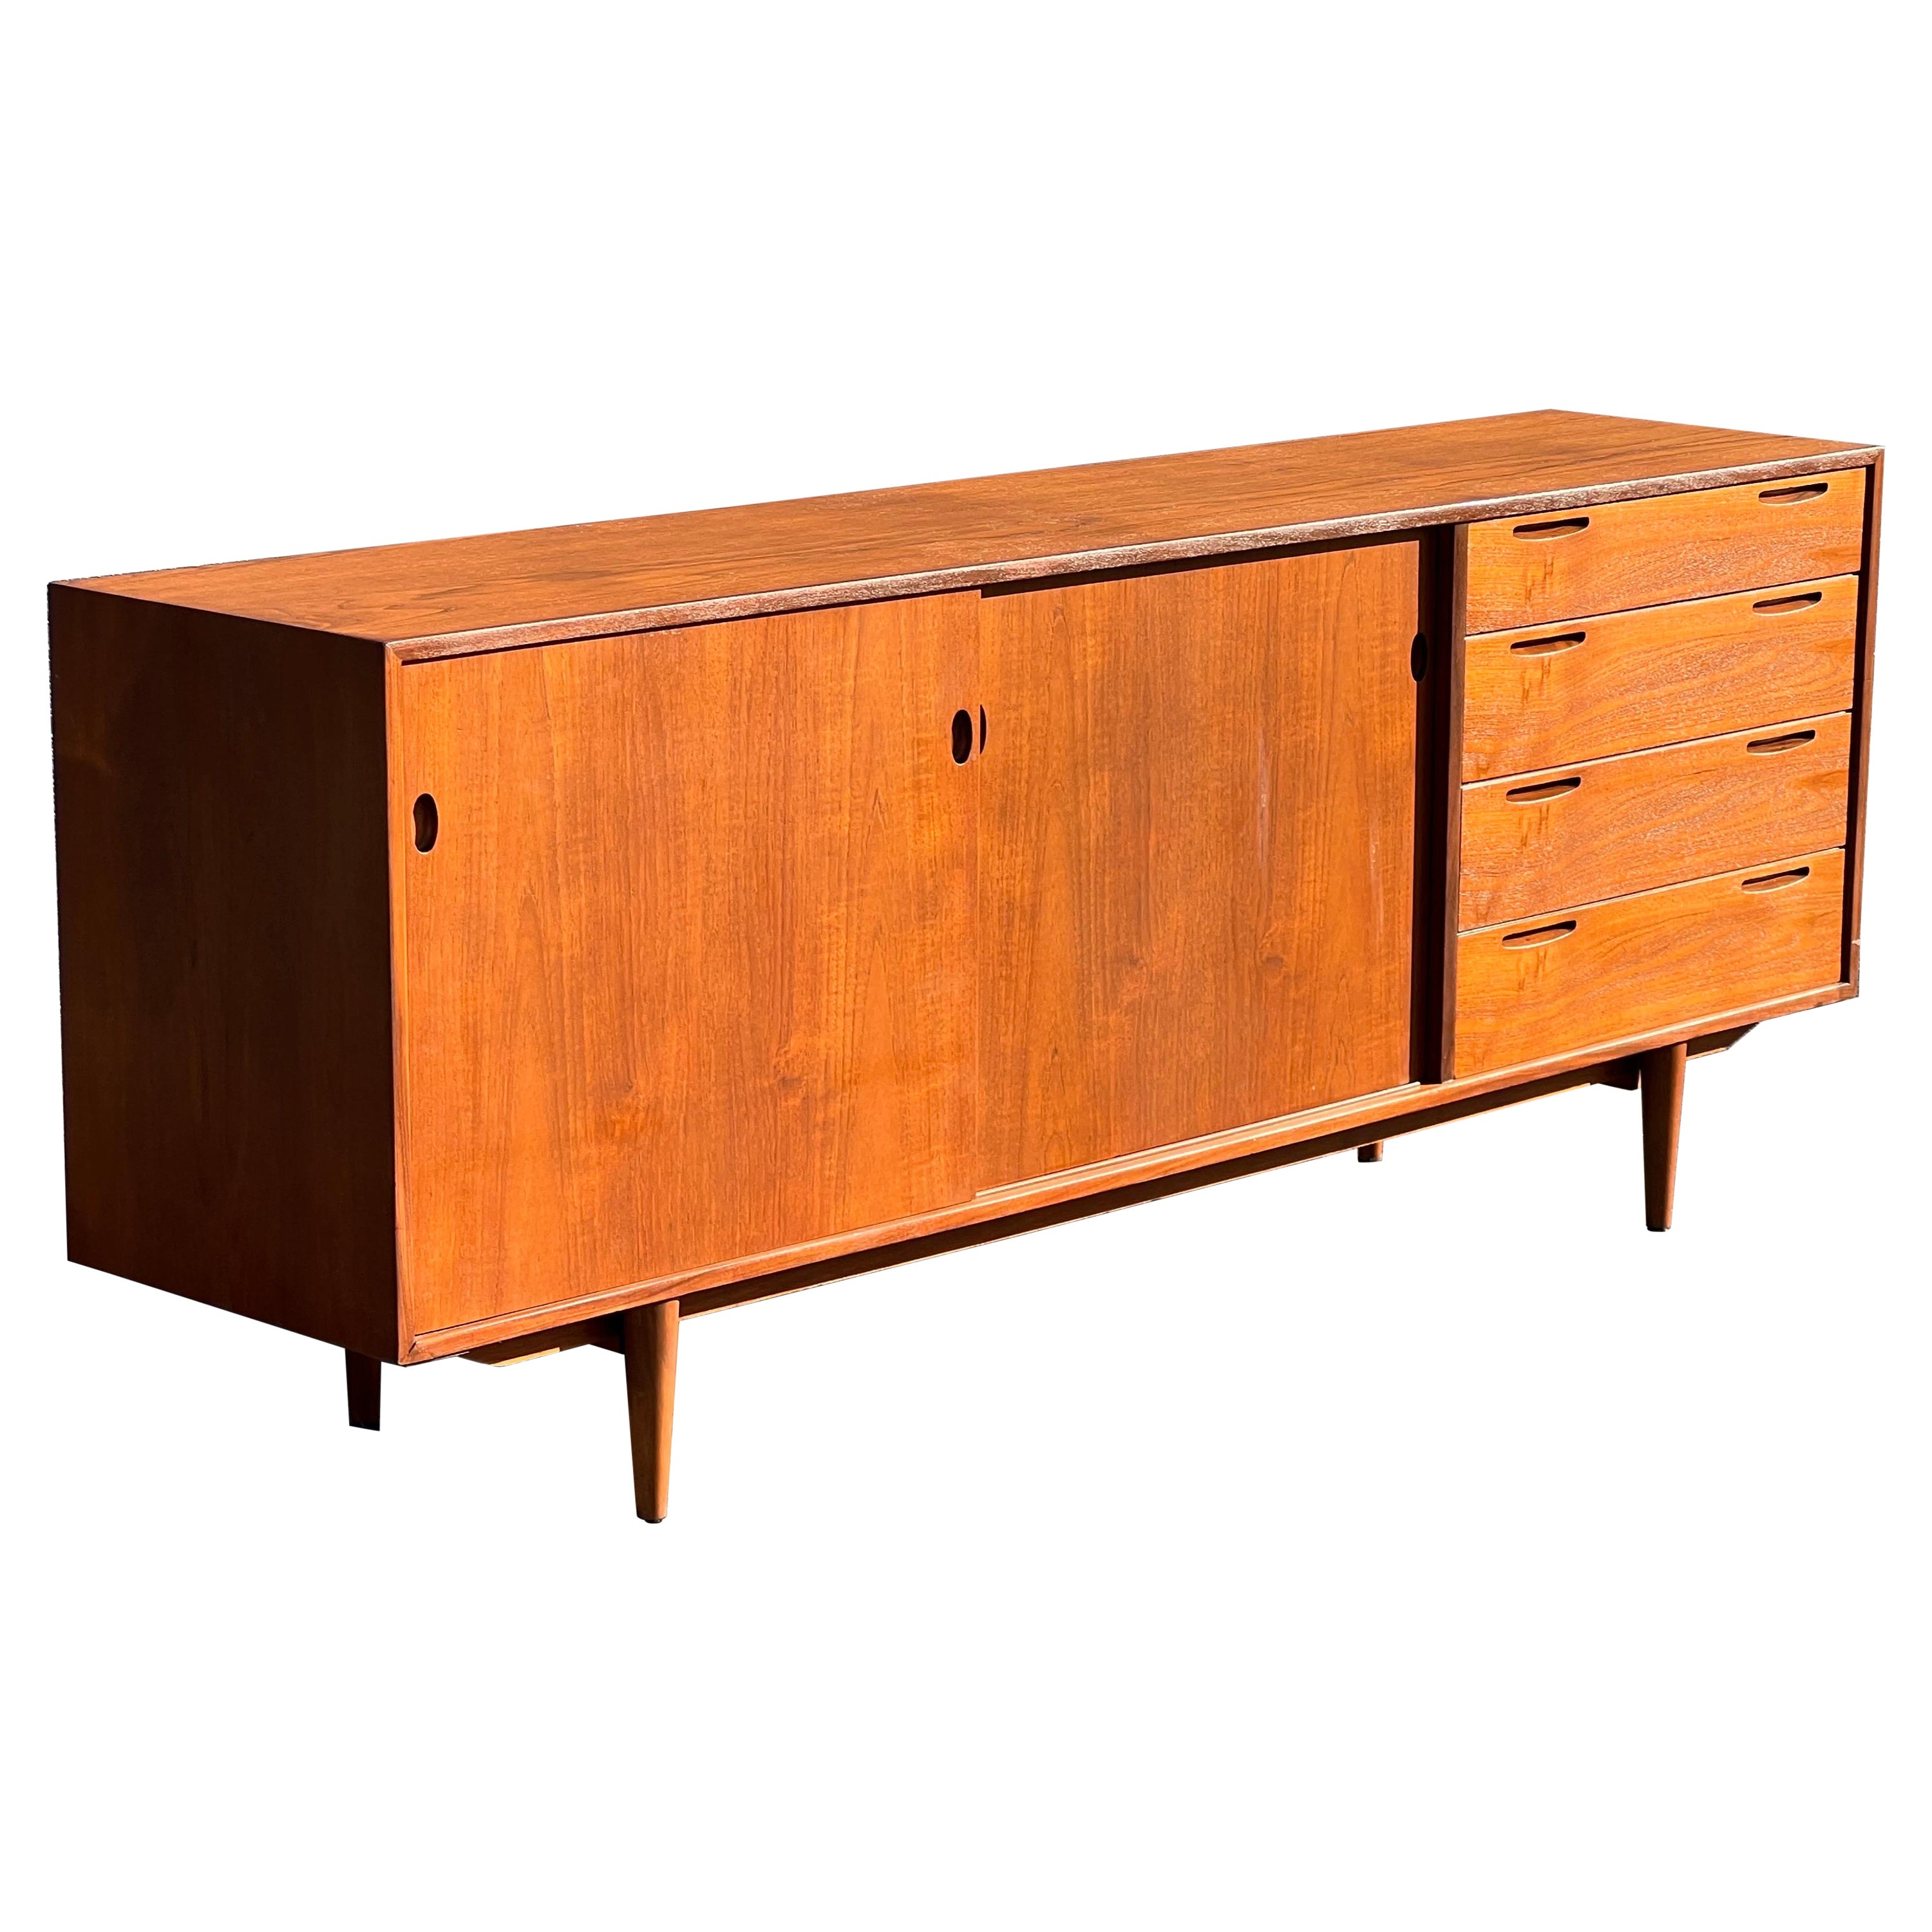 Ib Kofod-Larsen Teak Credenza for Clausen and Sons For Sale